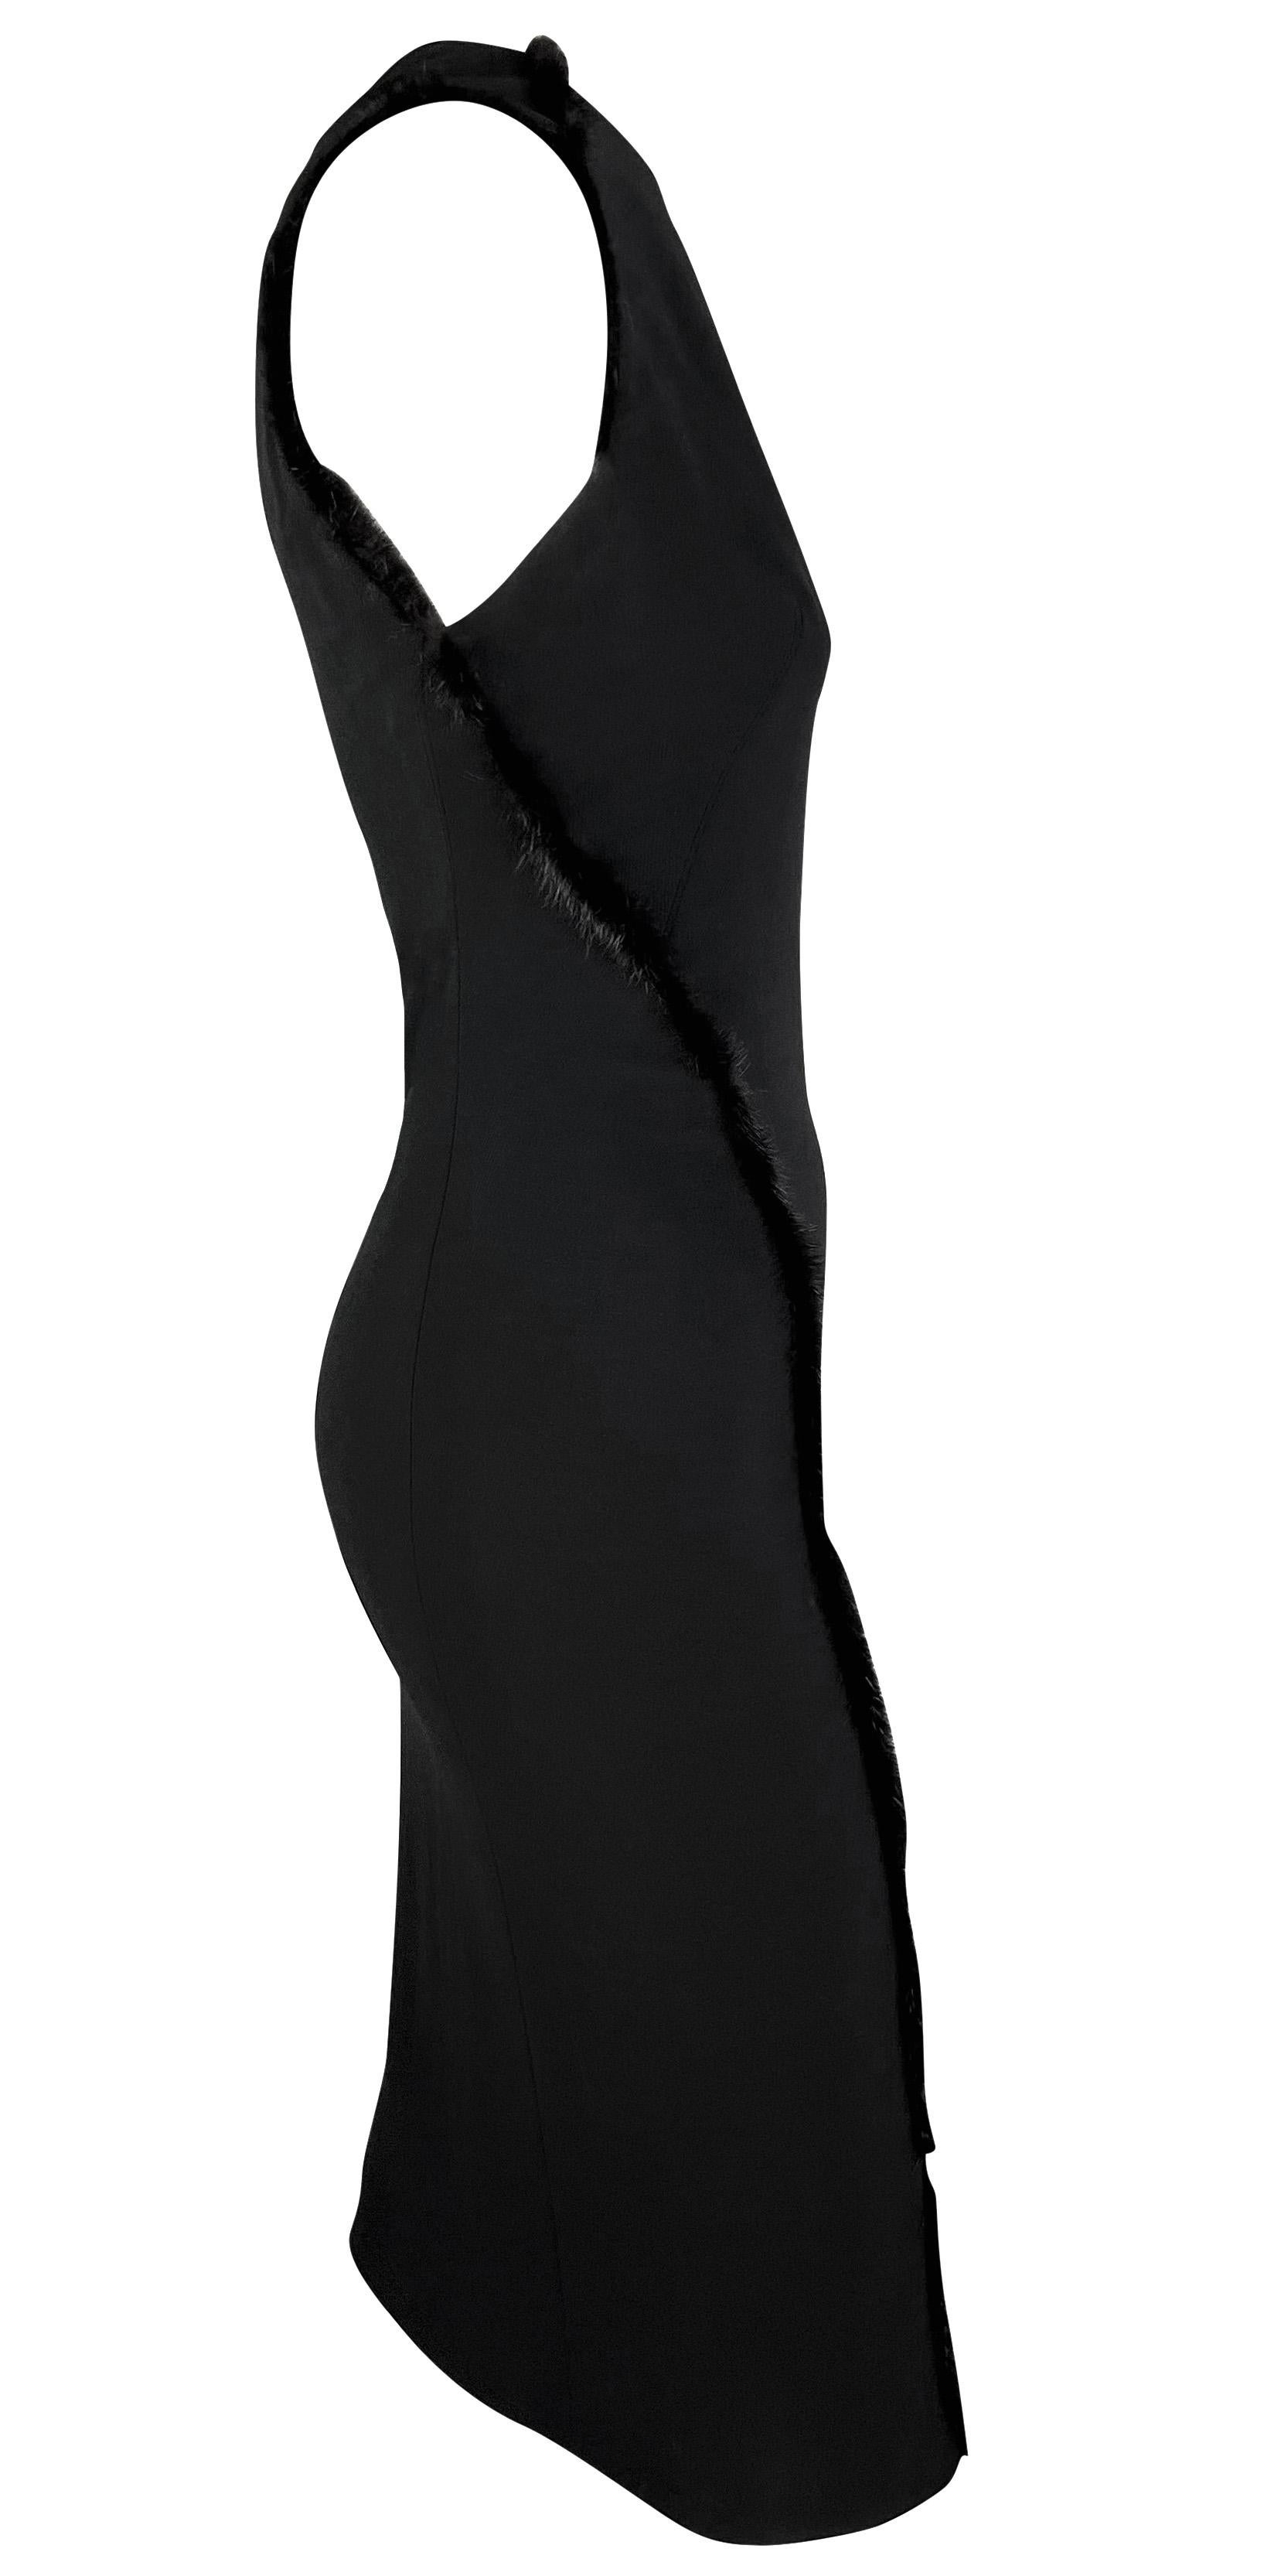 F/W 1999 Gianni Versace by Donatella Mink Fur Trimmed Sleeveless Pencil Dress For Sale 1